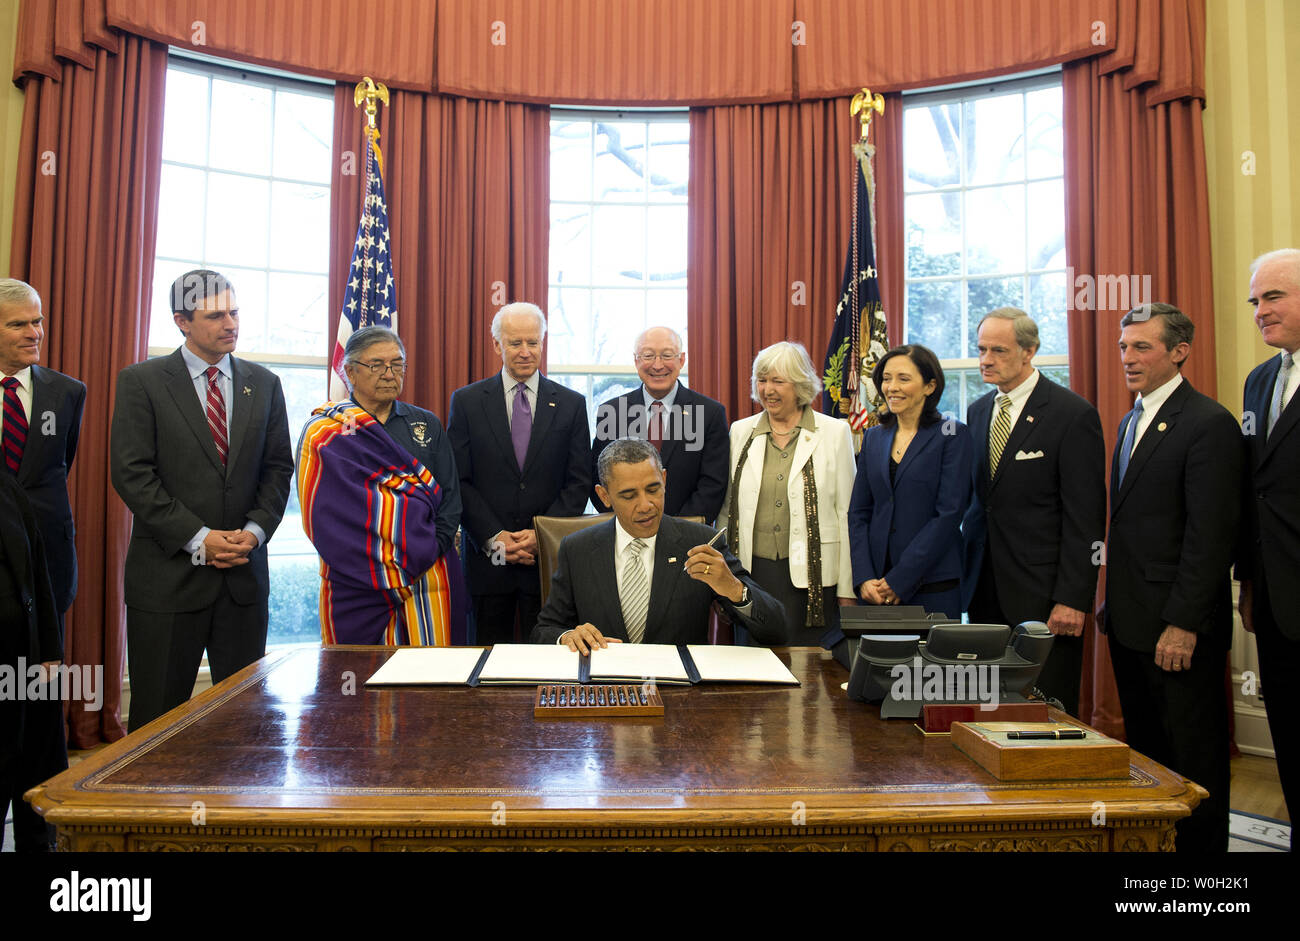 President Barack Obama signs a bill designating Rio Grande del Norte, in New Mexico, a National Monument, during a bill signing in the Oval Office at the White House on March 25, 2013 in Washington, D.C. President Obama signed a series of bills designating five new National Monuments, including, Rio Grande del Norte, in New Mexico, the First State Monument in Delaware, the Harriet Tubman Underground Railroad in Maryland, the Charles Young Buffalo Soldiers in Ohio and the San Juan Islands in Washington. UPI/Kevin Dietsch Stock Photo